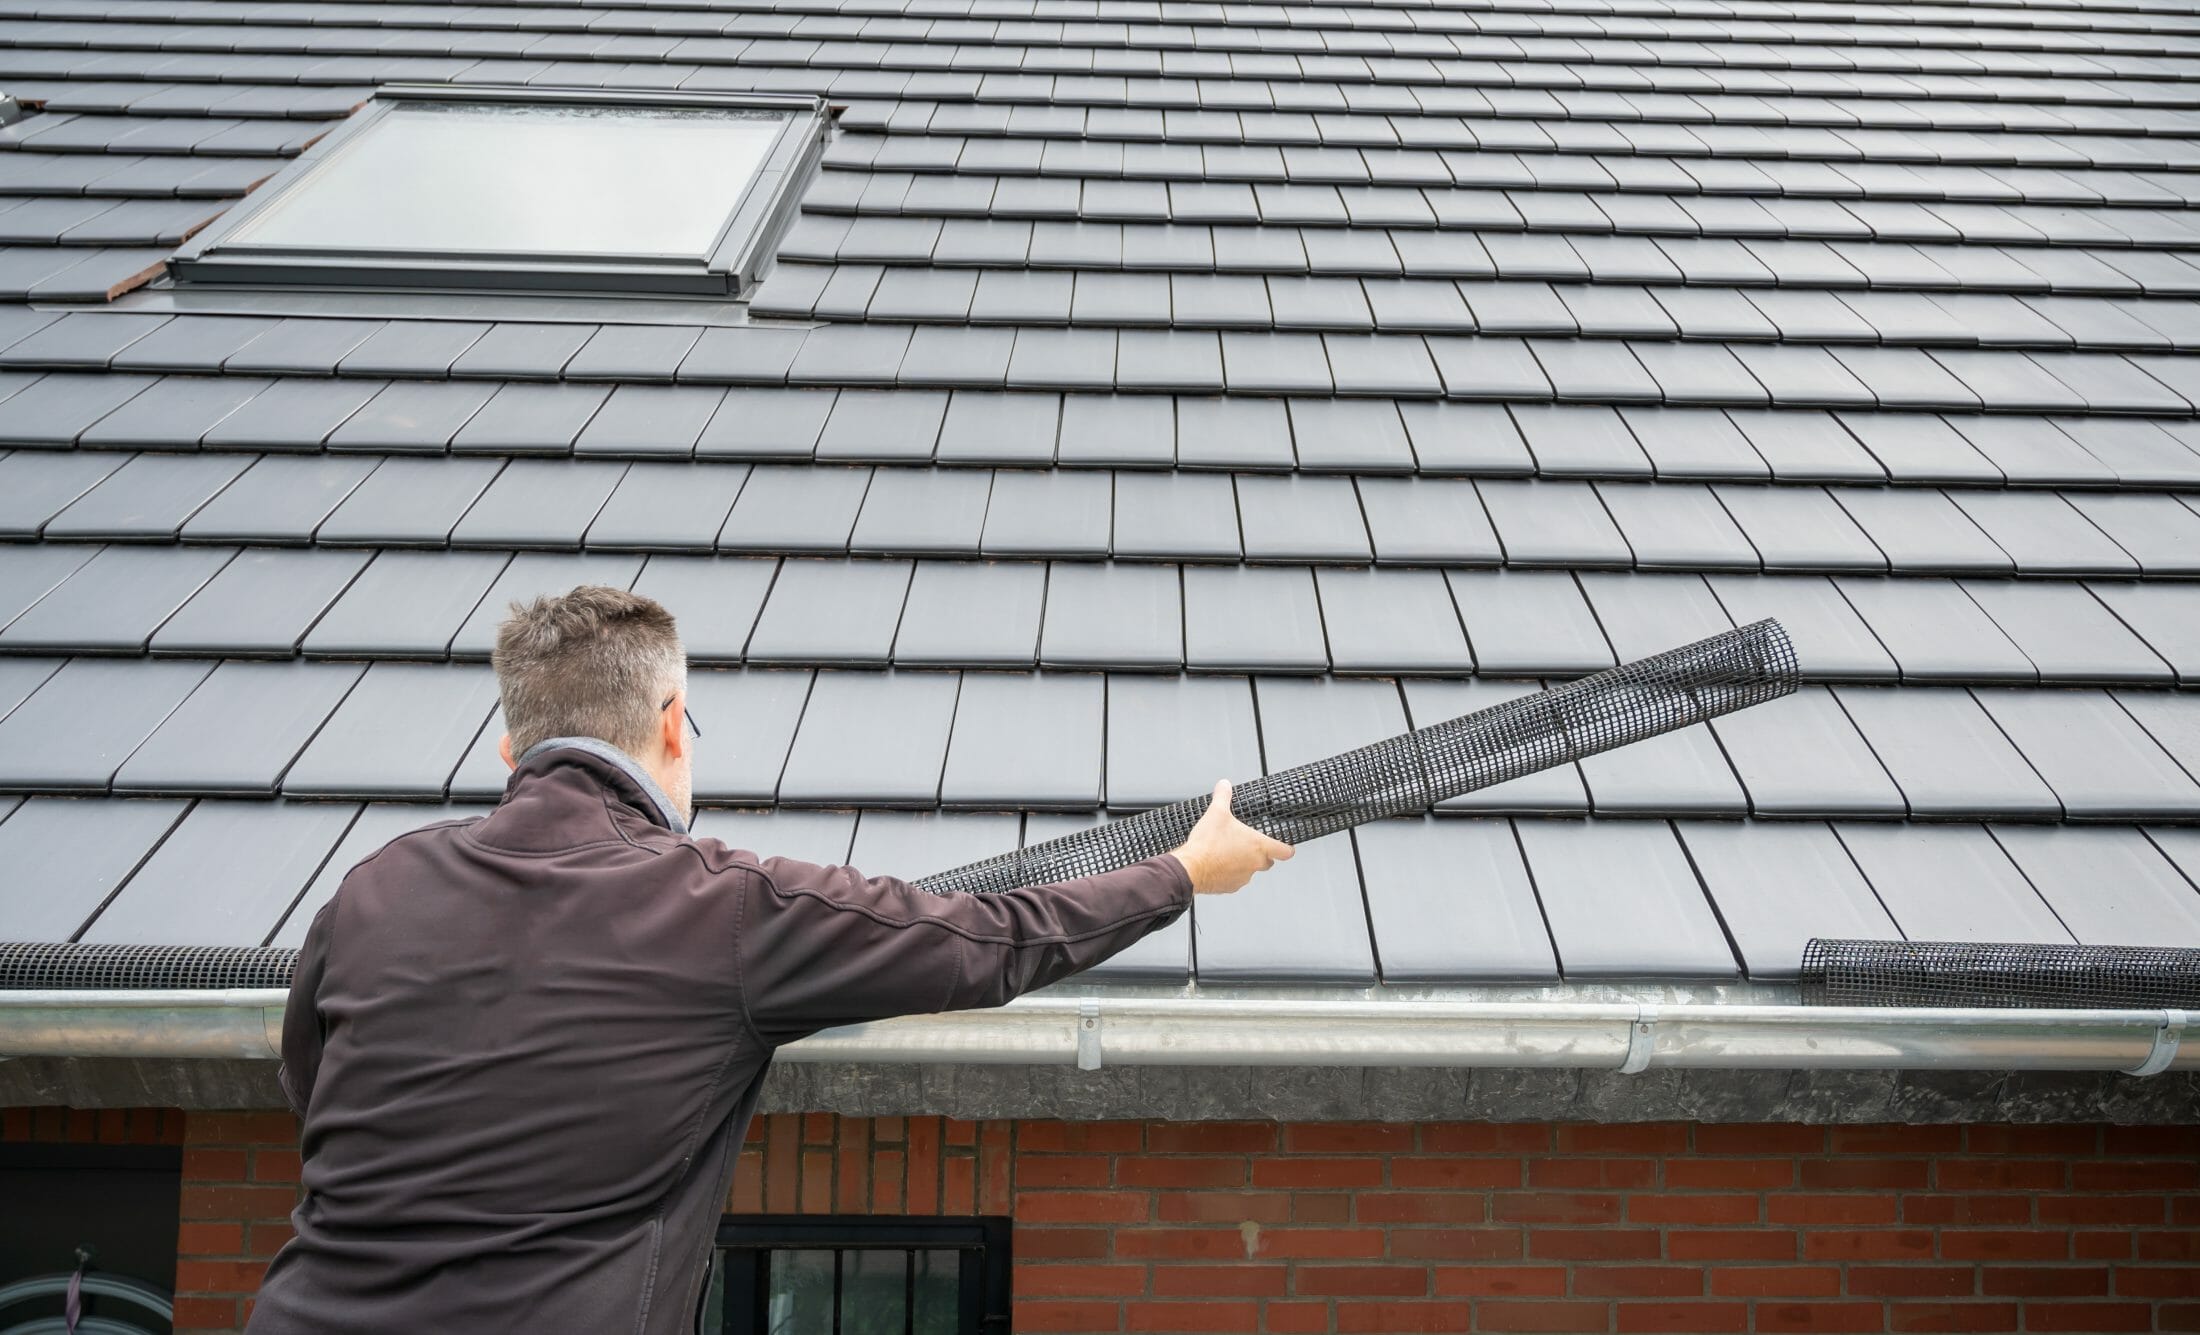 How long does the gutter guard installation take?